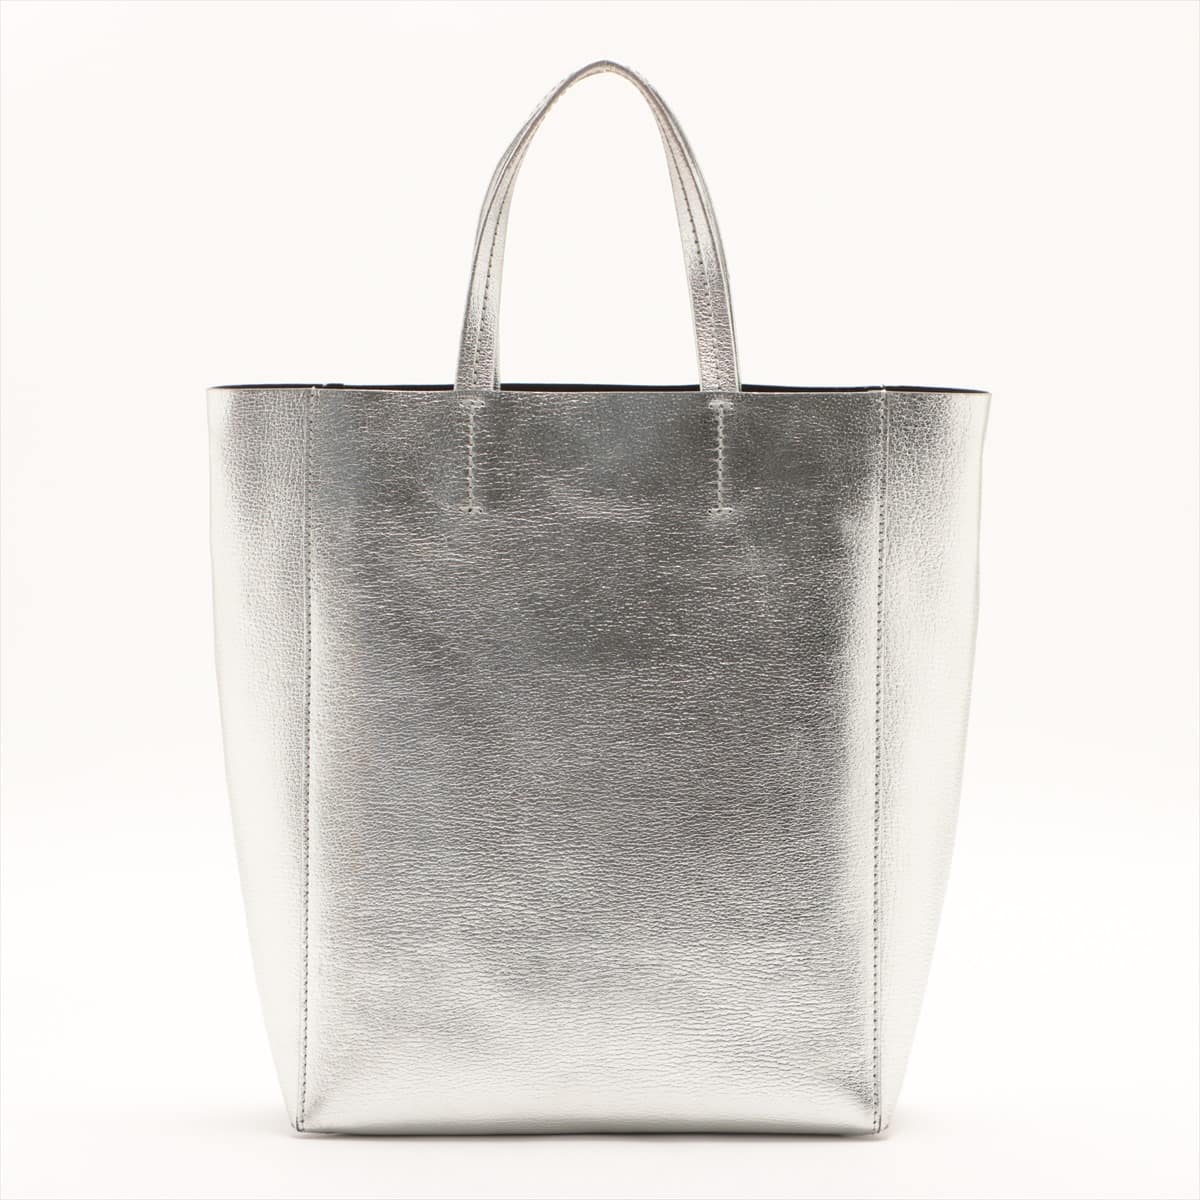 CELINE Vertical Cabas Small Leather 2 way tote bag Silver